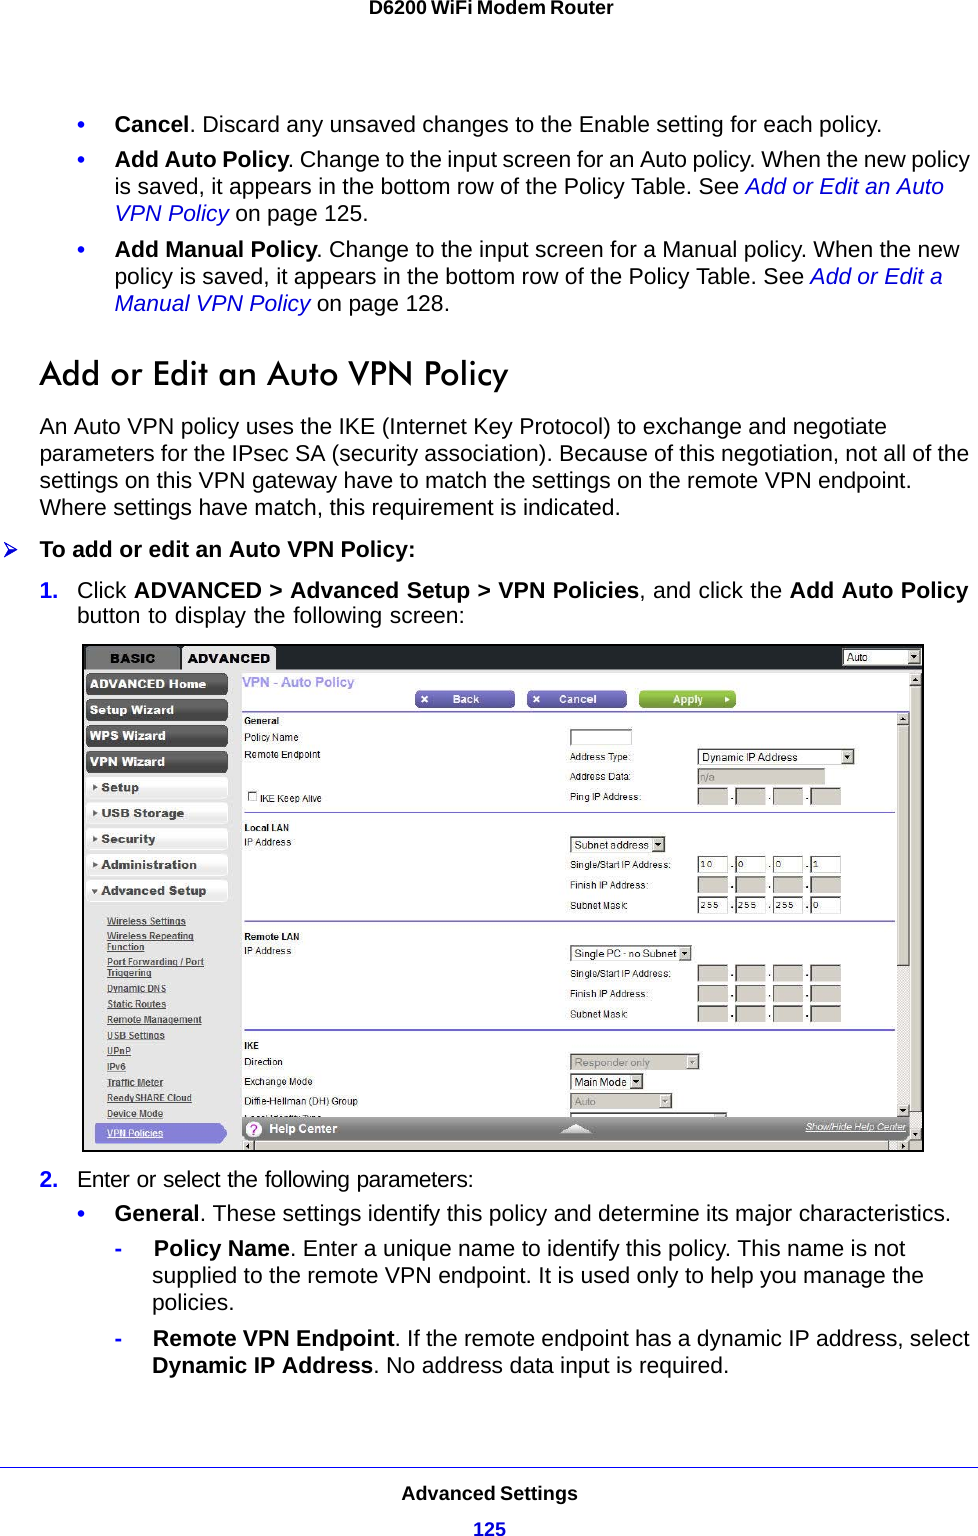 Advanced Settings125 D6200 WiFi Modem Router•Cancel. Discard any unsaved changes to the Enable setting for each policy.•Add Auto Policy. Change to the input screen for an Auto policy. When the new policy is saved, it appears in the bottom row of the Policy Table. See Add or Edit an Auto VPN Policy on page 125.•Add Manual Policy. Change to the input screen for a Manual policy. When the new policy is saved, it appears in the bottom row of the Policy Table. See Add or Edit a Manual VPN Policy on page 128.Add or Edit an Auto VPN PolicyAn Auto VPN policy uses the IKE (Internet Key Protocol) to exchange and negotiate parameters for the IPsec SA (security association). Because of this negotiation, not all of the settings on this VPN gateway have to match the settings on the remote VPN endpoint. Where settings have match, this requirement is indicated.To add or edit an Auto VPN Policy:1. Click ADVANCED &gt; Advanced Setup &gt; VPN Policies, and click the Add Auto Policy button to display the following screen:2. Enter or select the following parameters:•General. These settings identify this policy and determine its major characteristics.-     Policy Name. Enter a unique name to identify this policy. This name is not supplied to the remote VPN endpoint. It is used only to help you manage the policies.-     Remote VPN Endpoint. If the remote endpoint has a dynamic IP address, select Dynamic IP Address. No address data input is required.